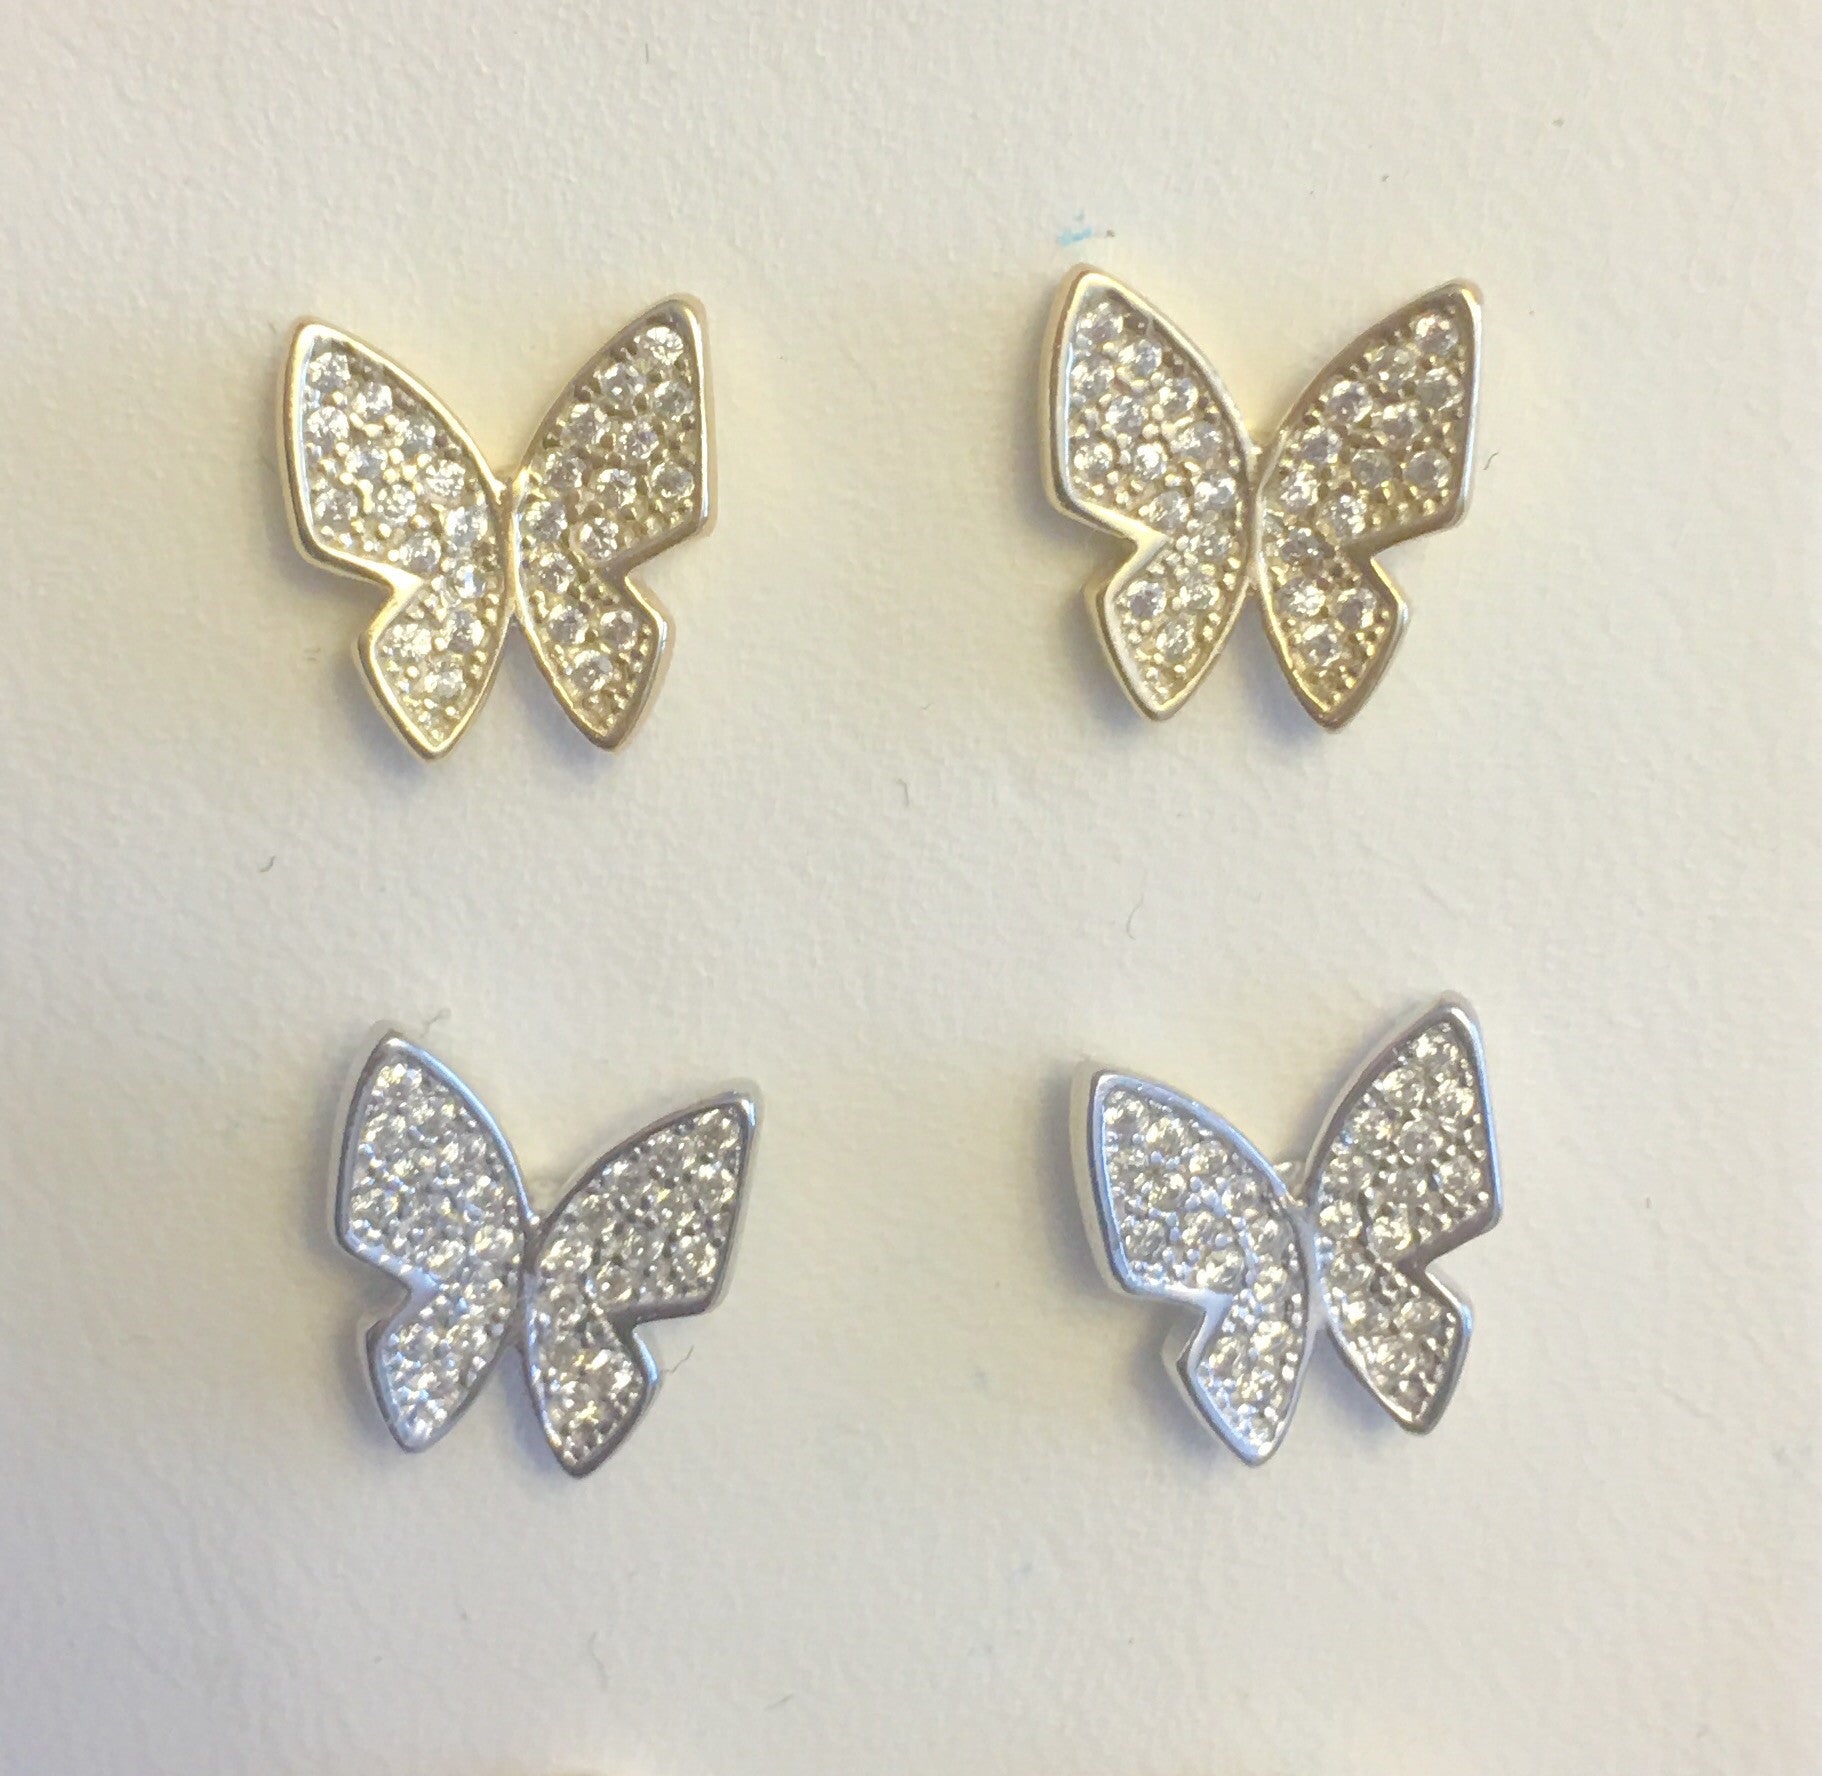 Butterfly Stud Earrings - Retail Therapy Jewelry